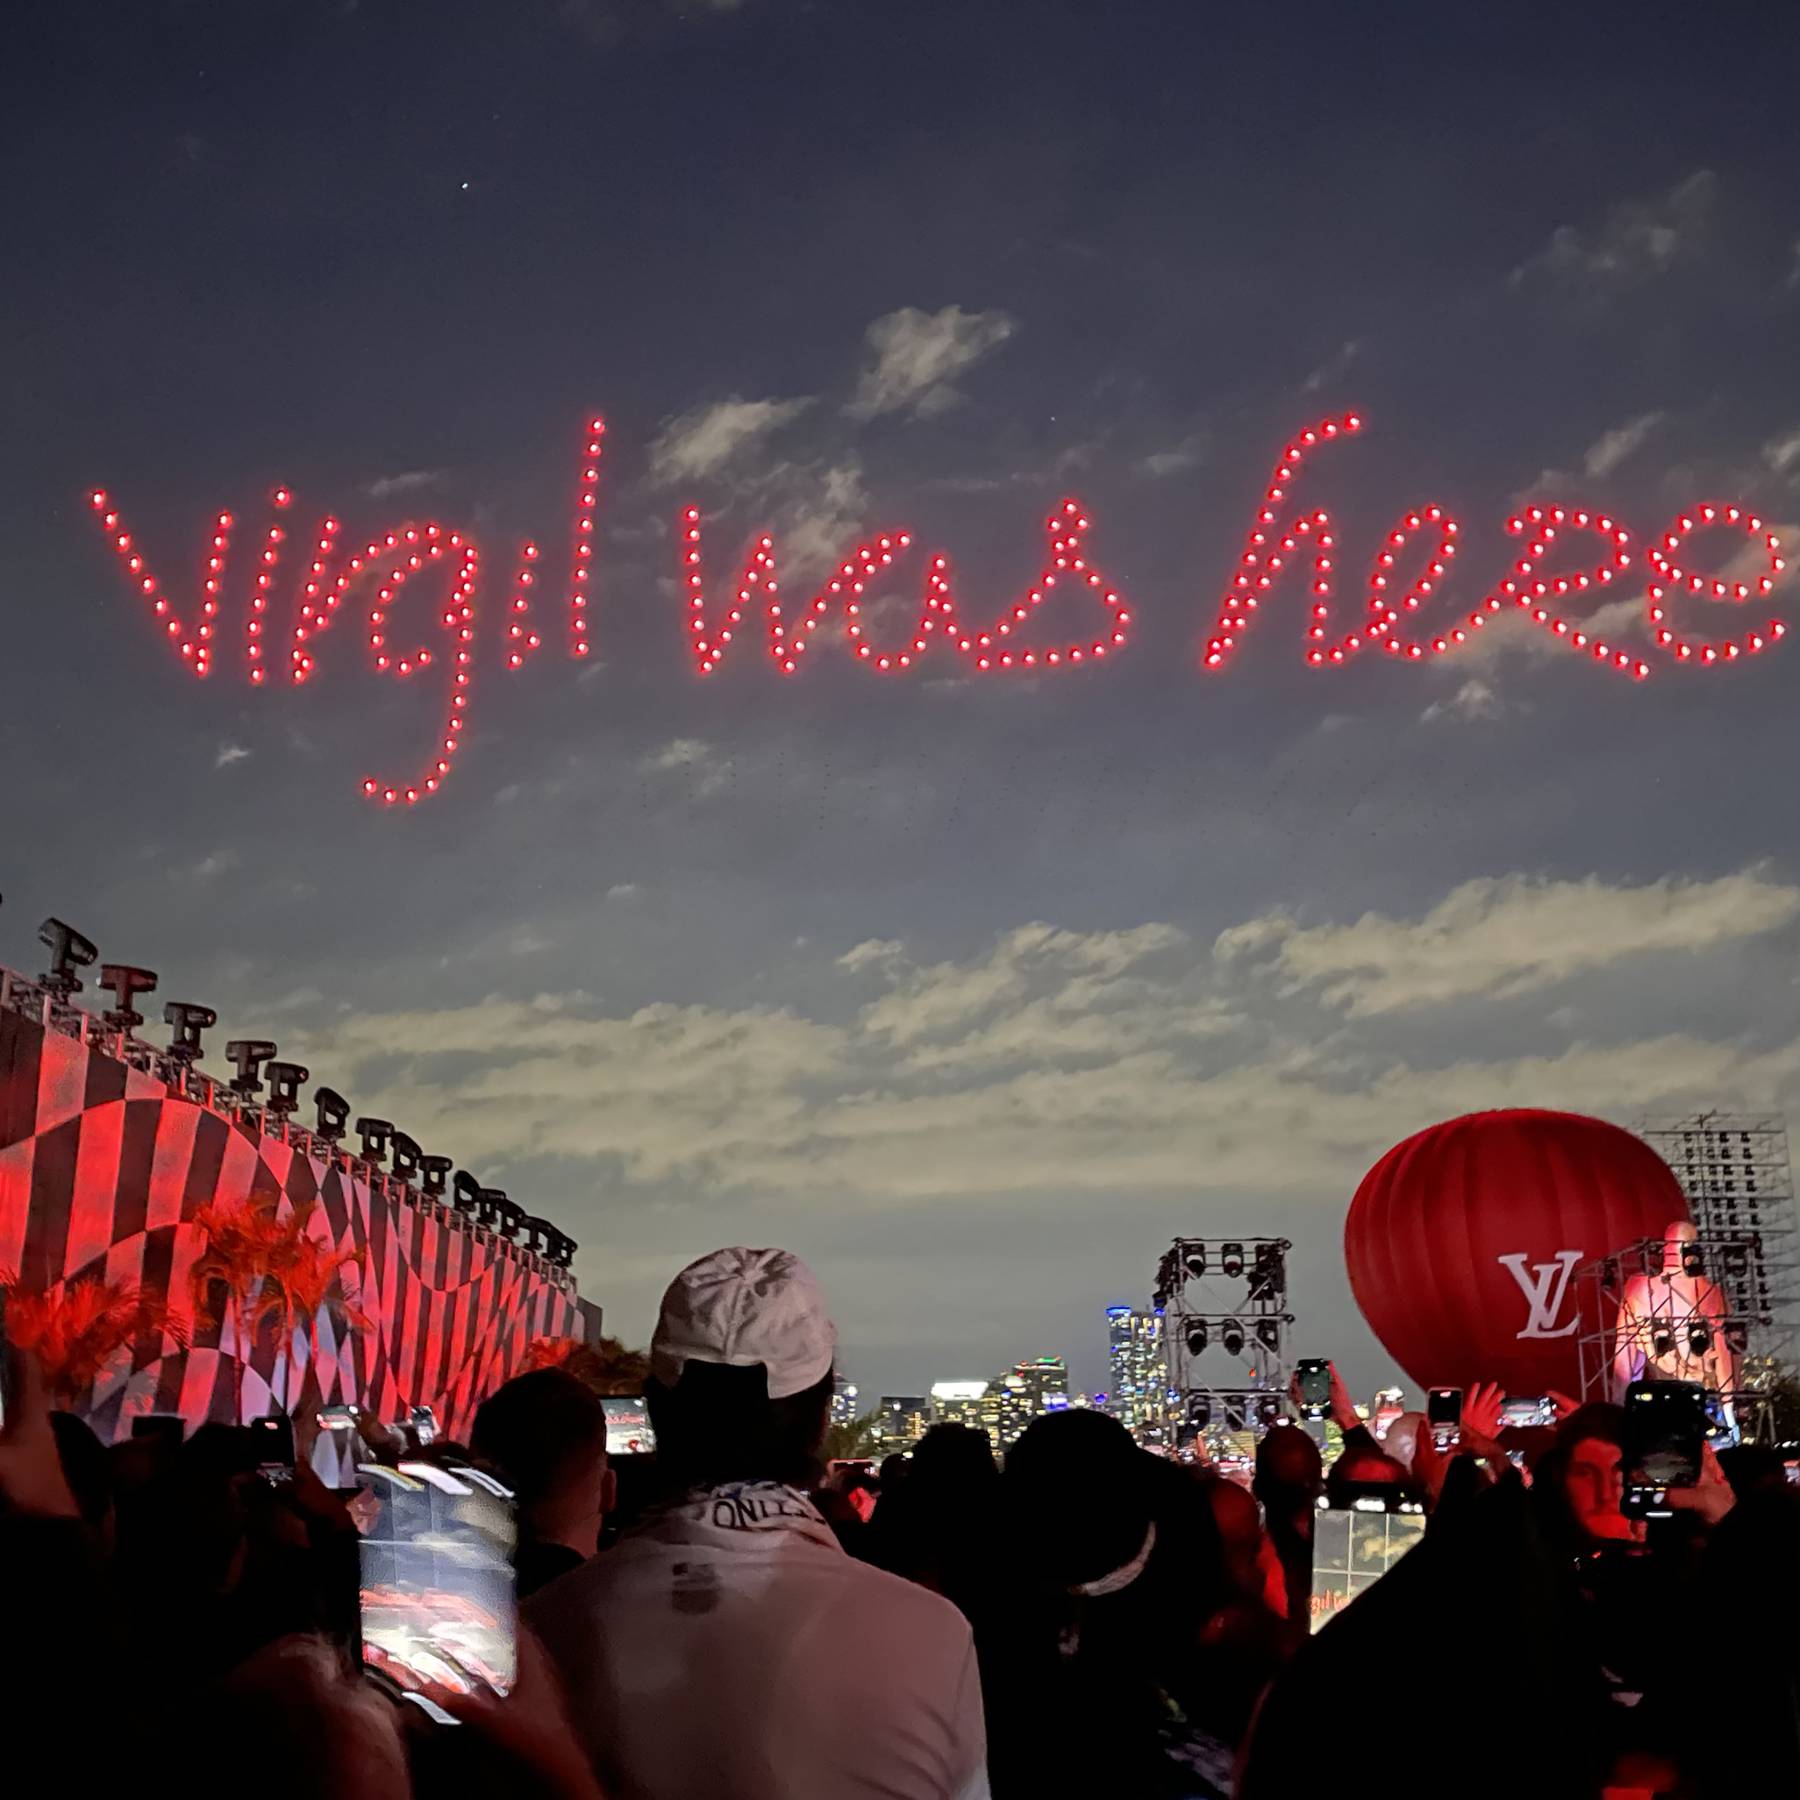 Virgil Abloh Show for Louis Vuitton in Miami Was a Memorial and